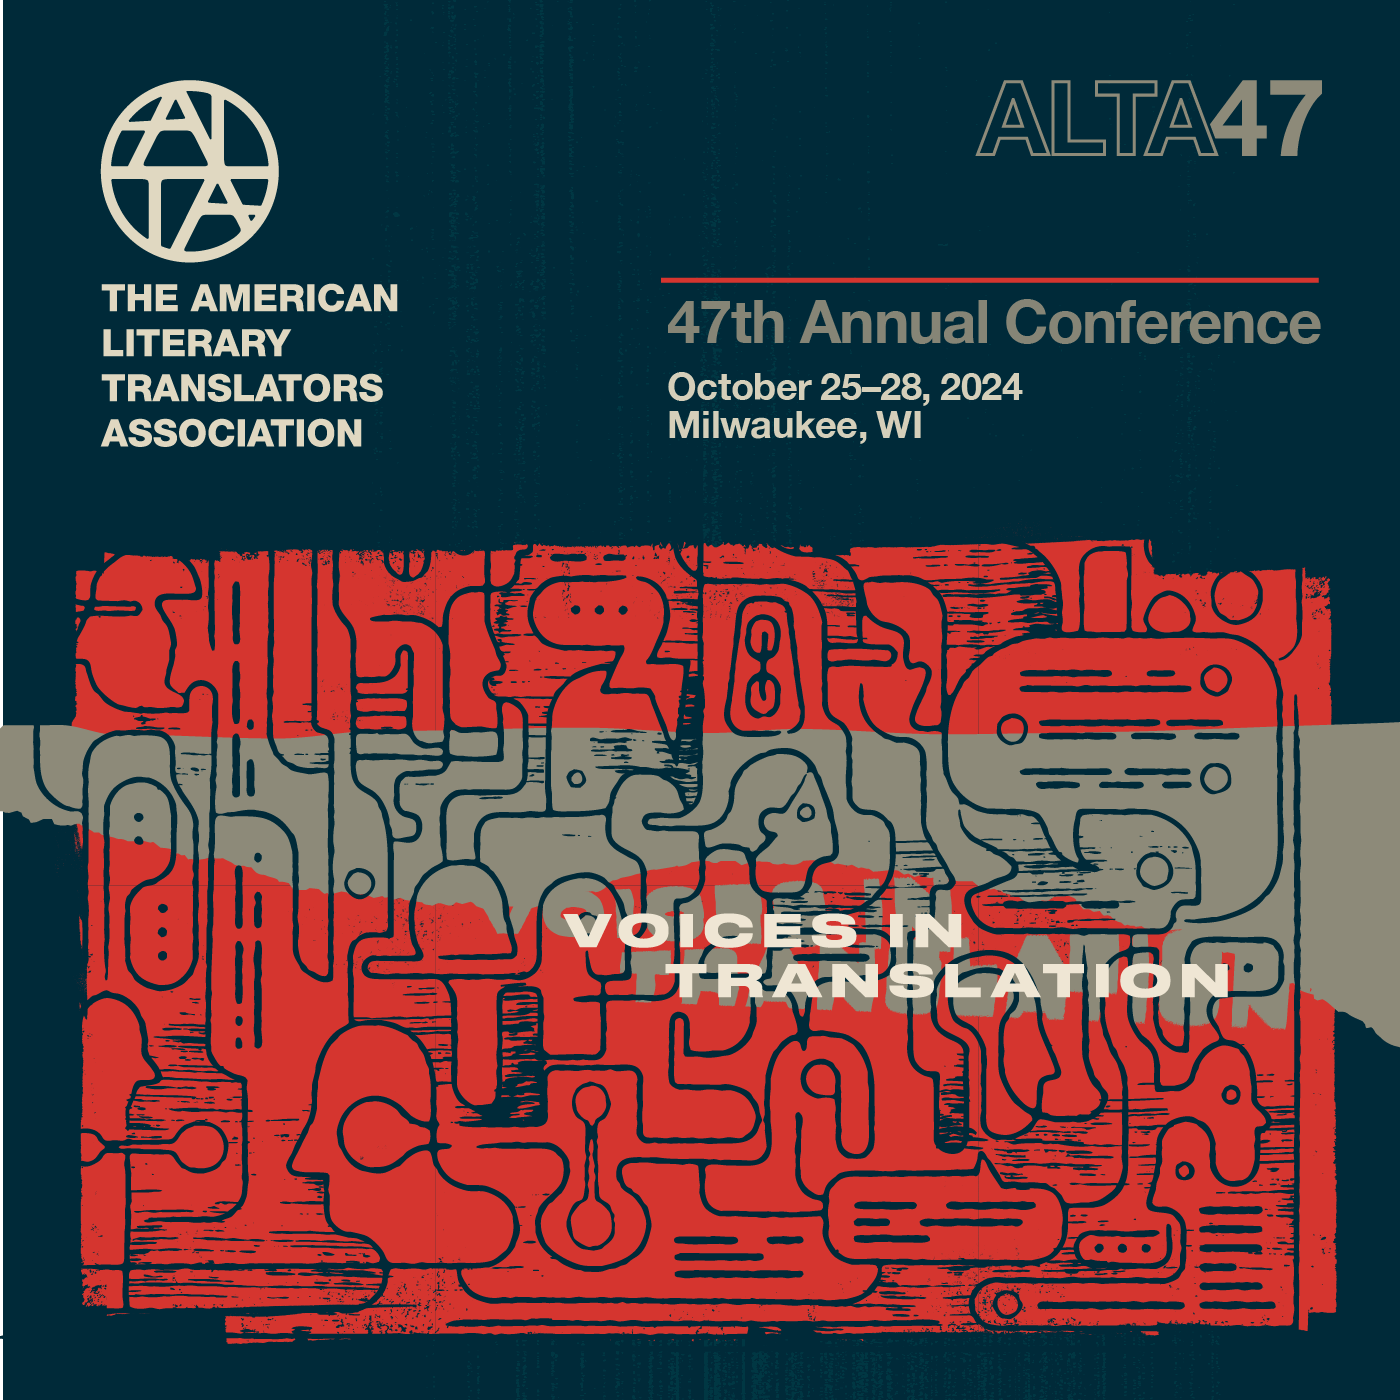 The image for ALTA47 features a drawing of different people communicating through talk and text. The drawing is in red with a navy background. Overtop is layered the title: Voices in Translation.